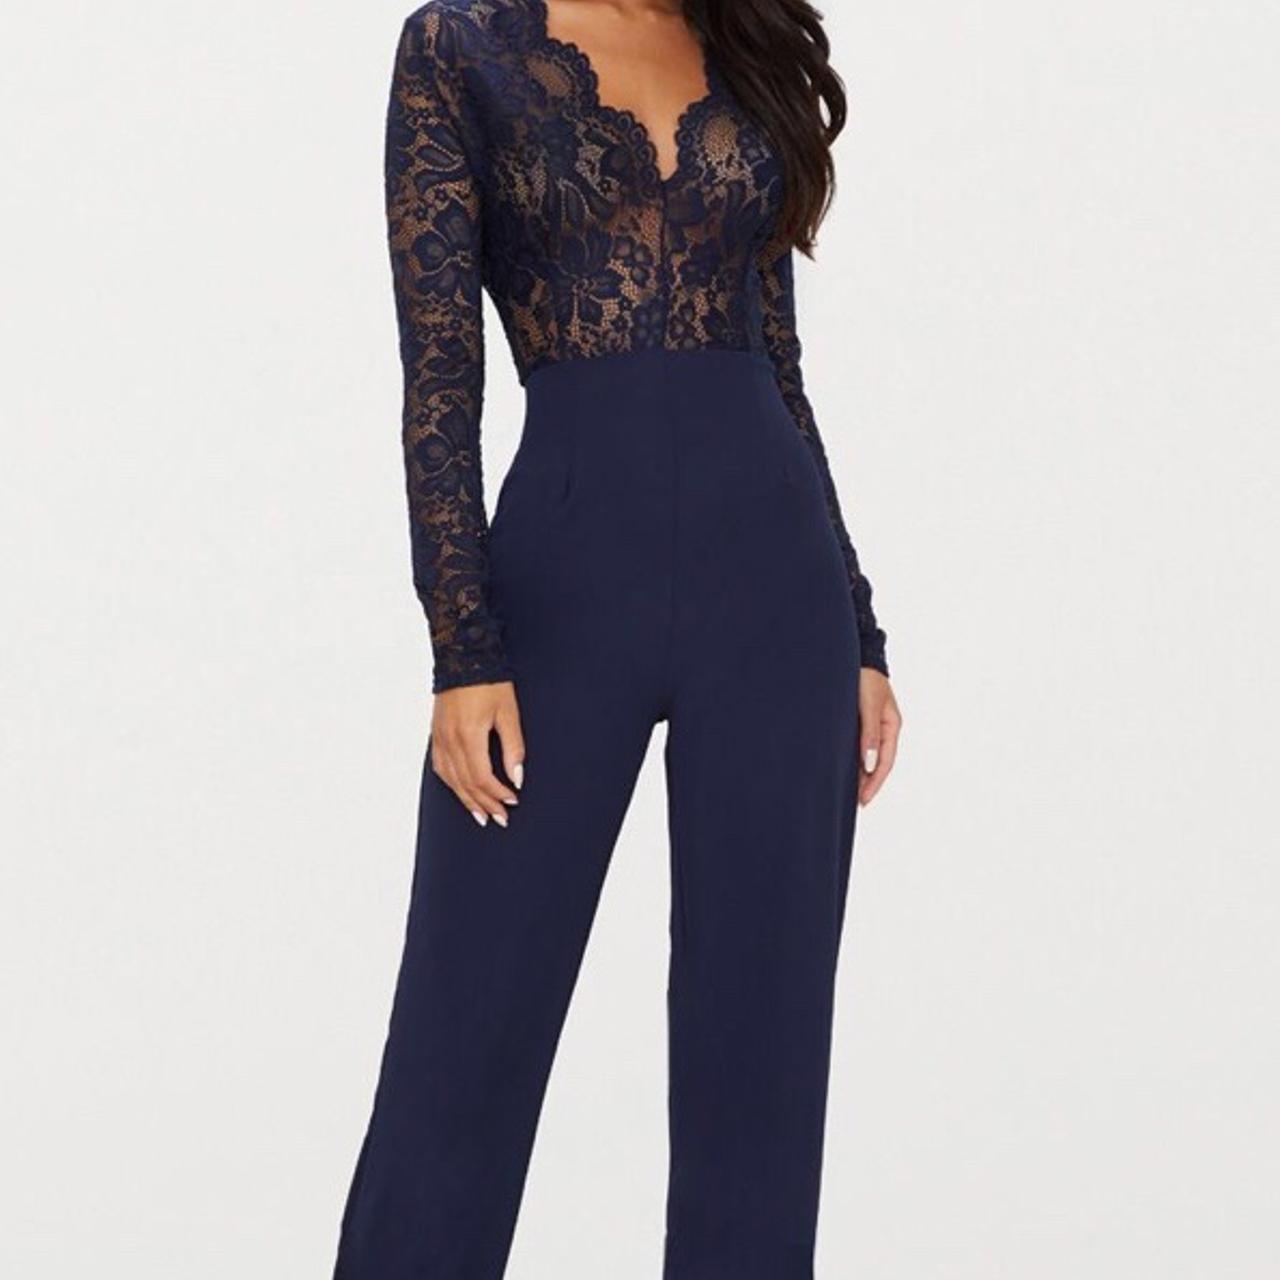 Pretty Little Thing Navy Lace Top Jumpsuit Wide... - Depop